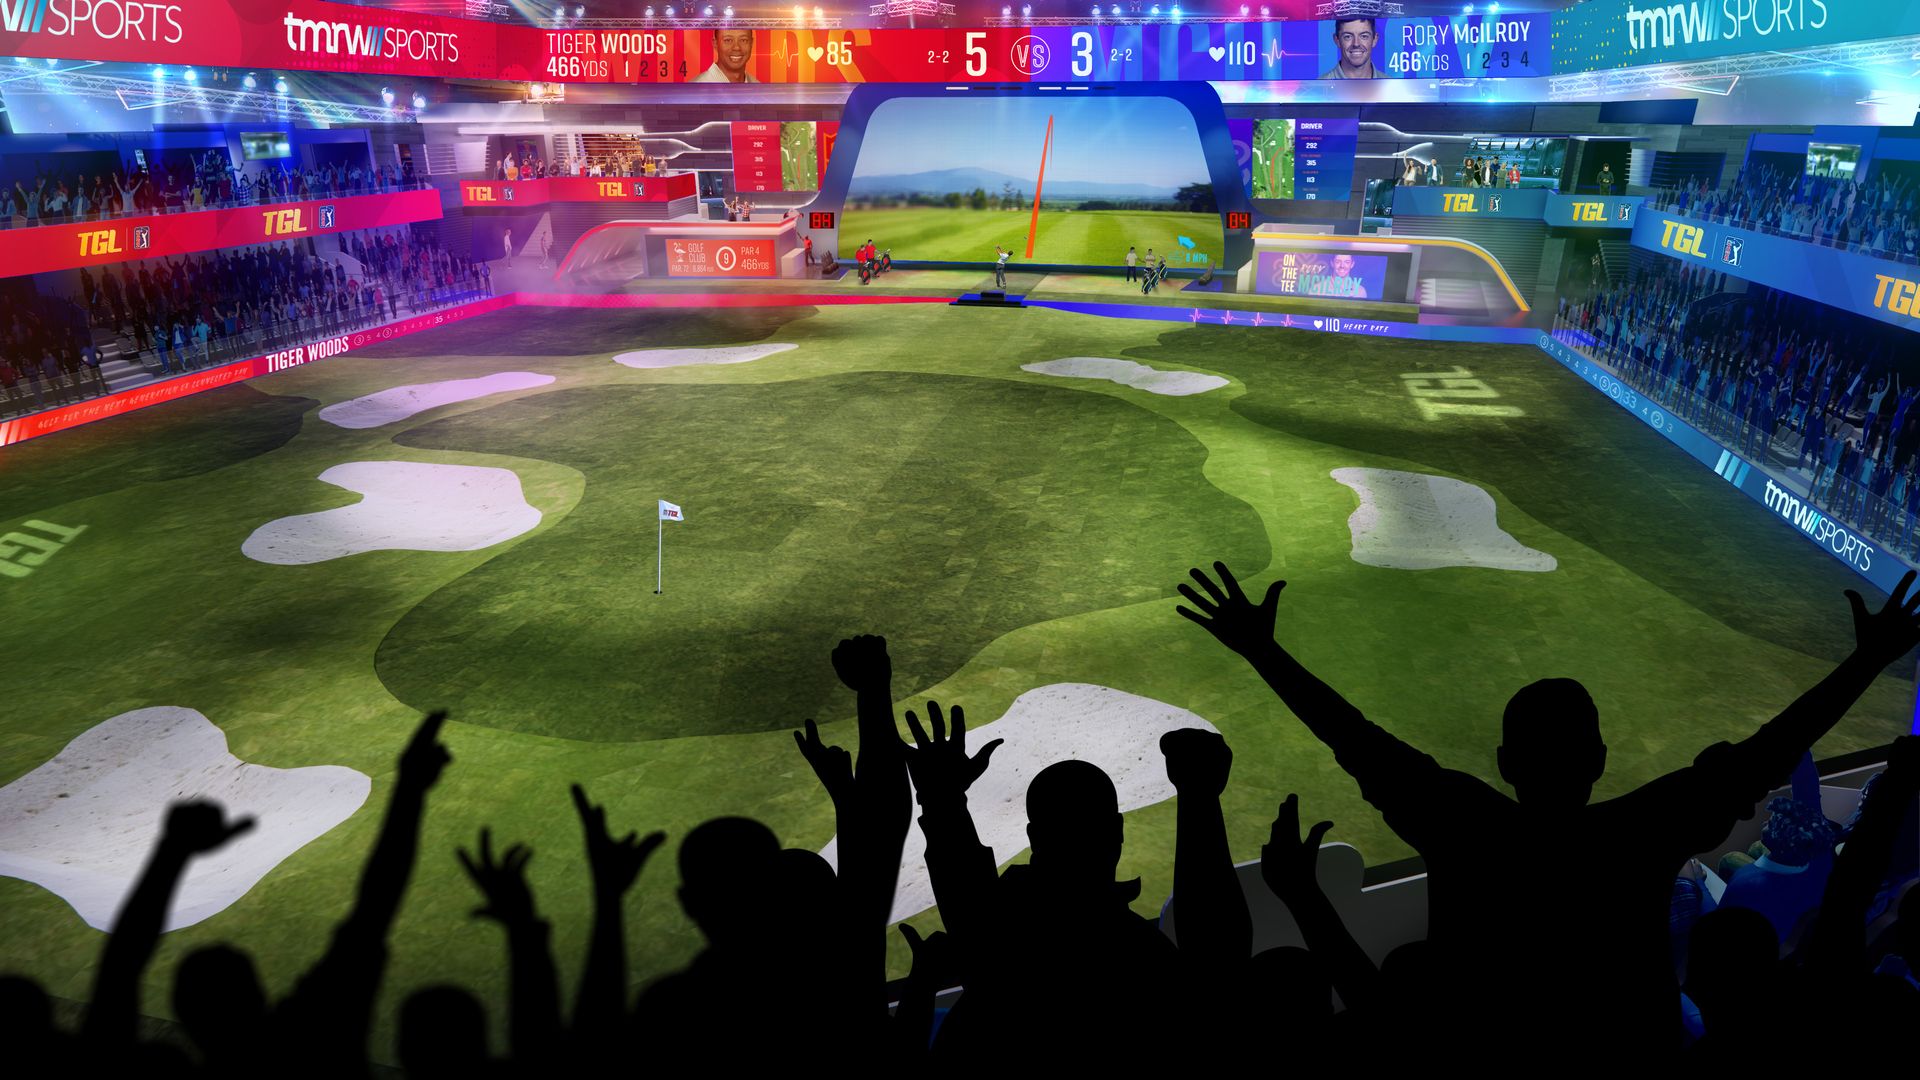 A rendering of the new TGL golf league with the PGA Tour.